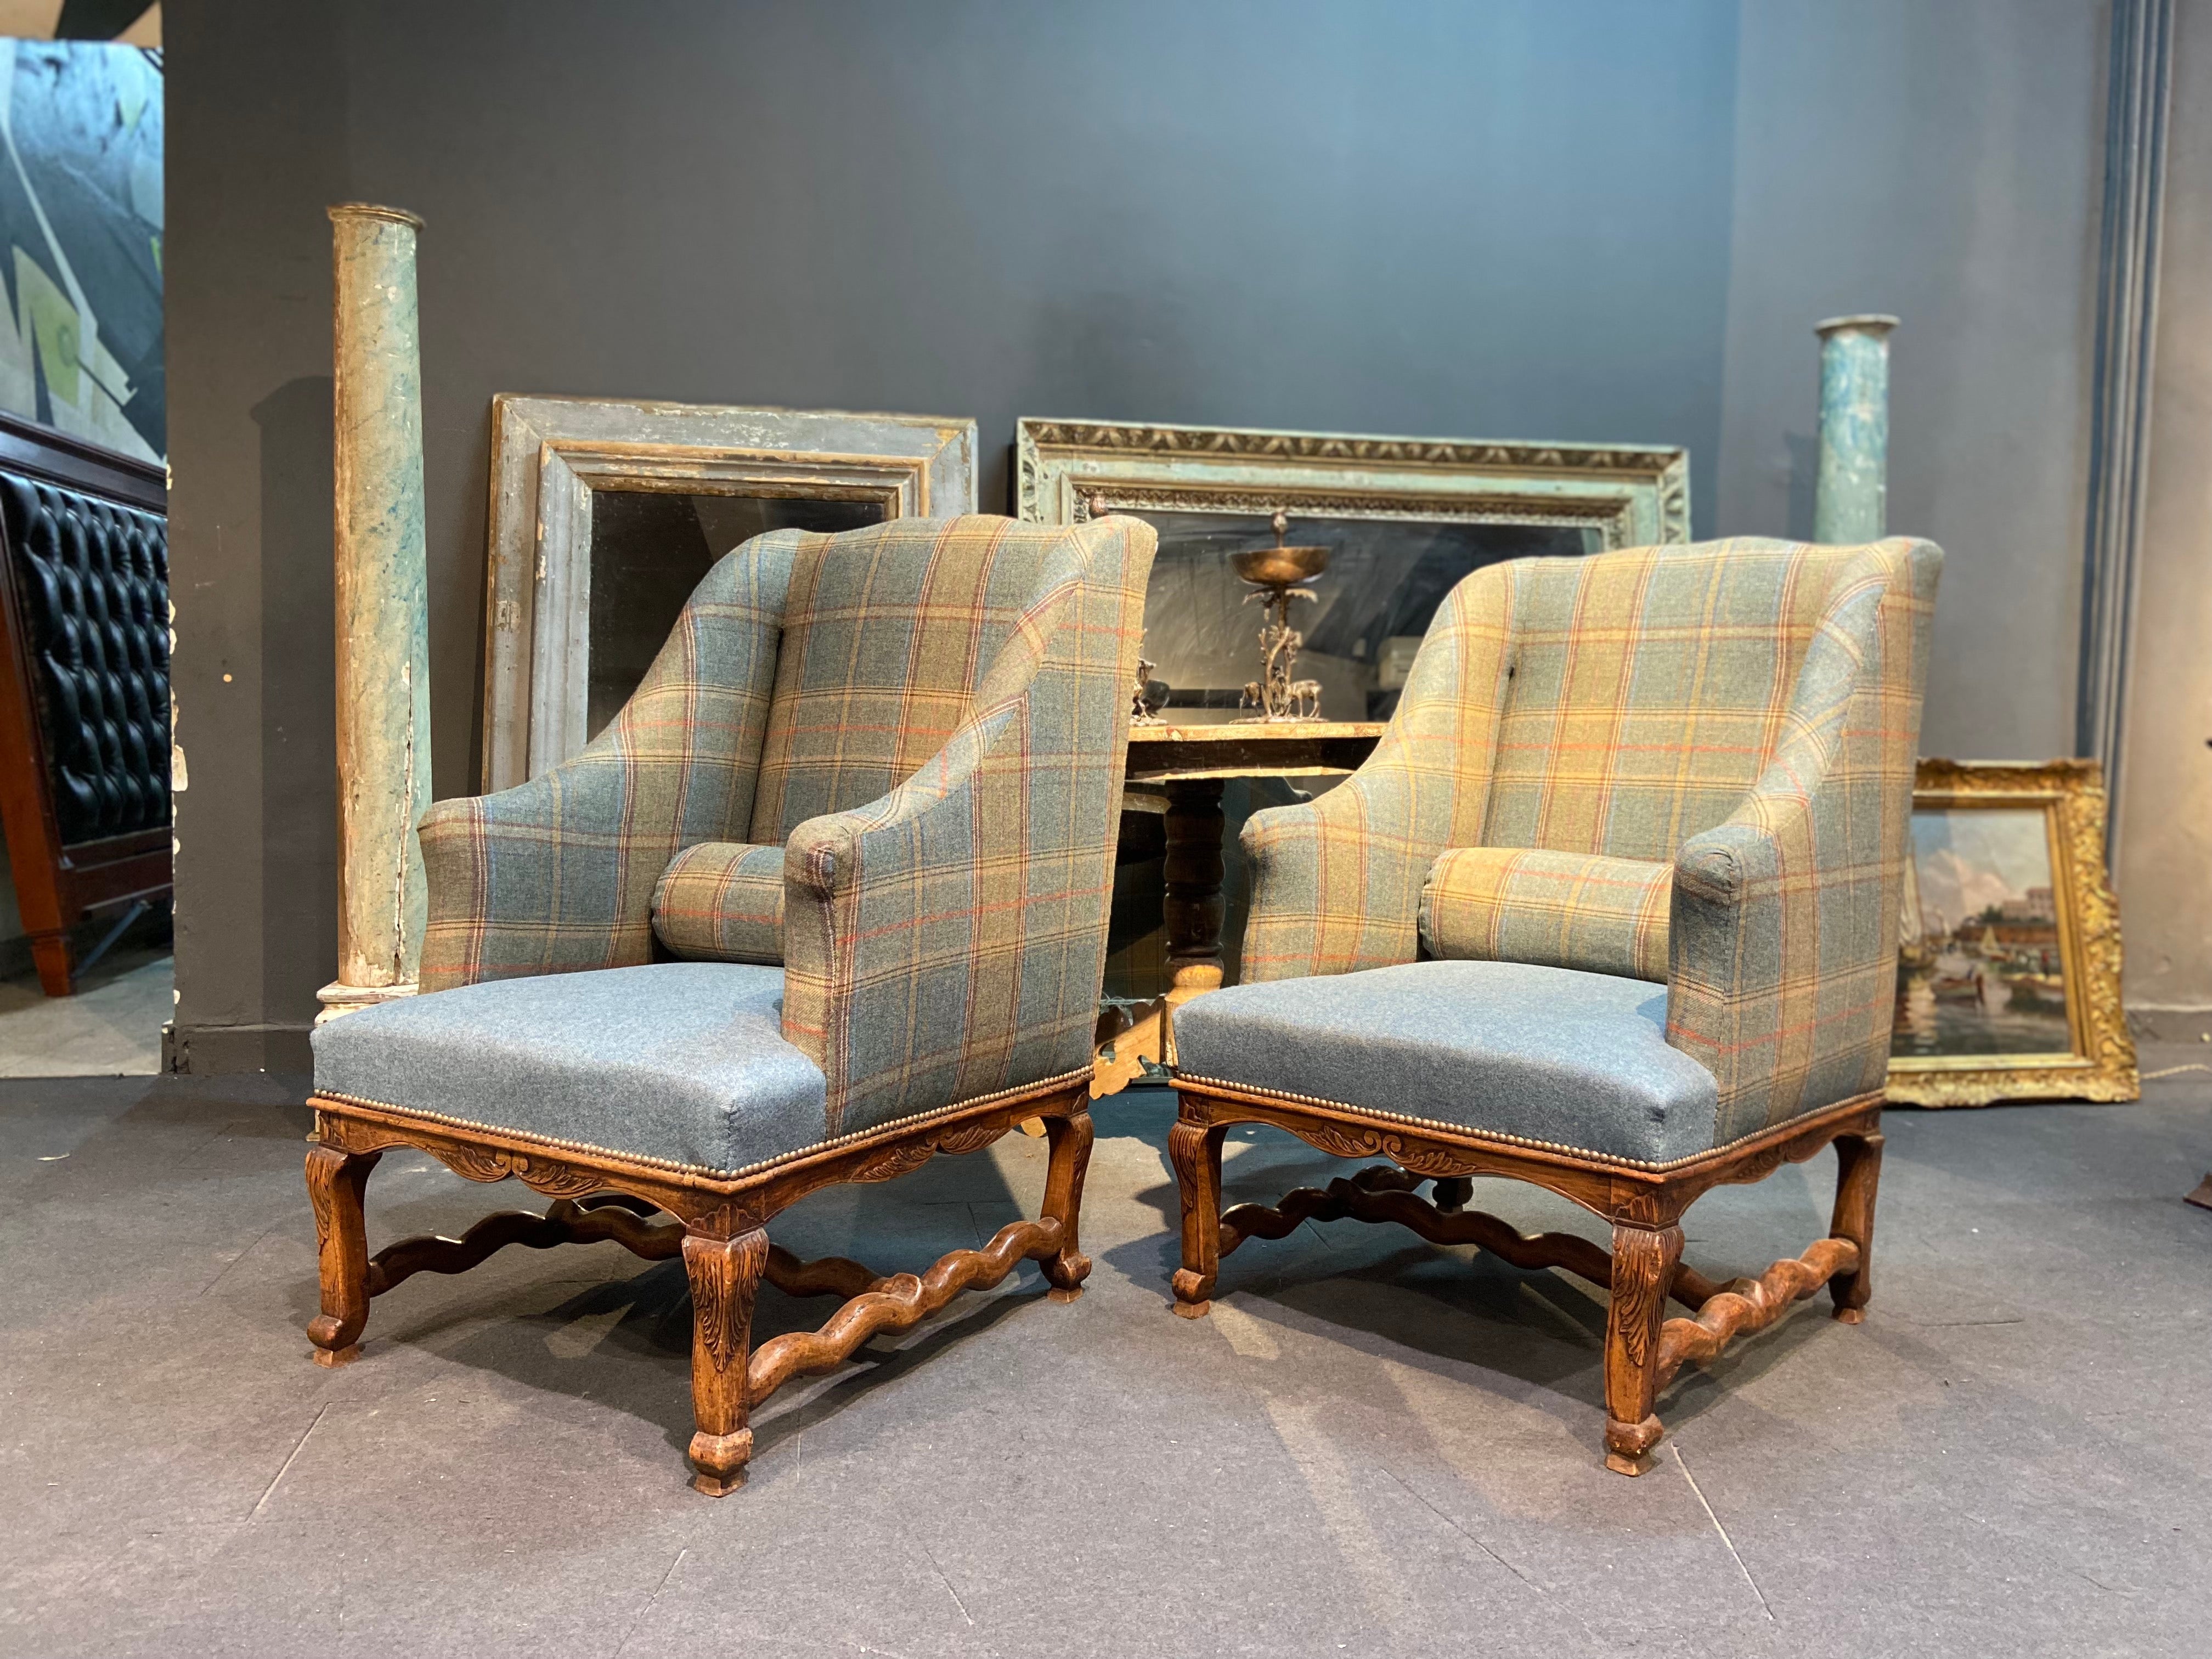 Two French armchairs forming a pair, but could be used separately as an accent in your home. Frames are carved wooden sheep bones decorated with foliage scrolls with high winged backrest. The armchairs are newly upholstered in plain and gray blue